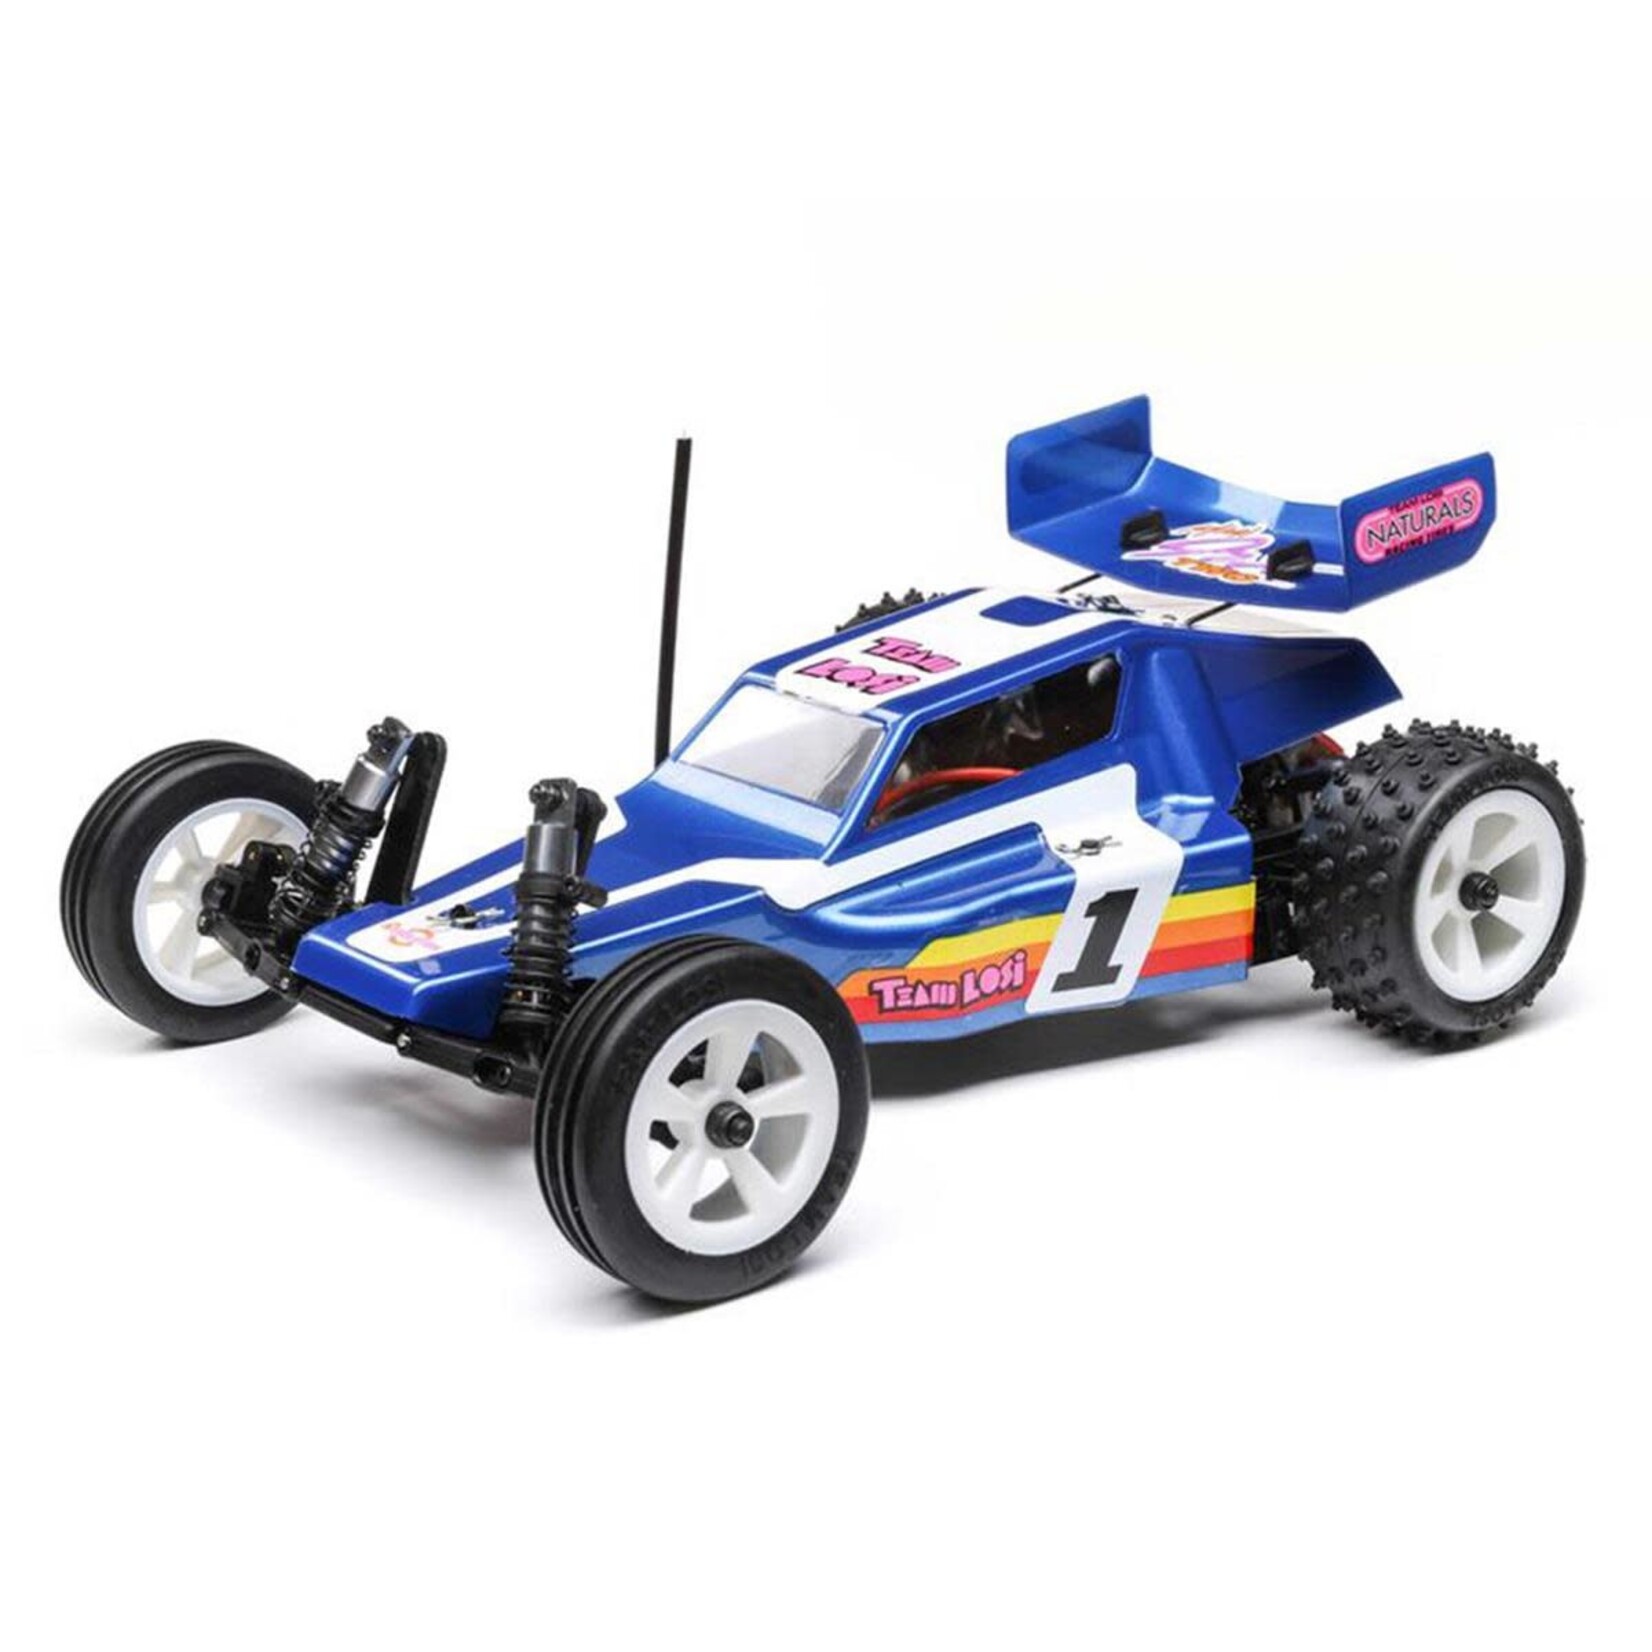 Losi Losi JRX2 1/16 RTR 2WD Buggy (Blue) w/2.4GHz Radio, Battery & Charger #LOS01020T2